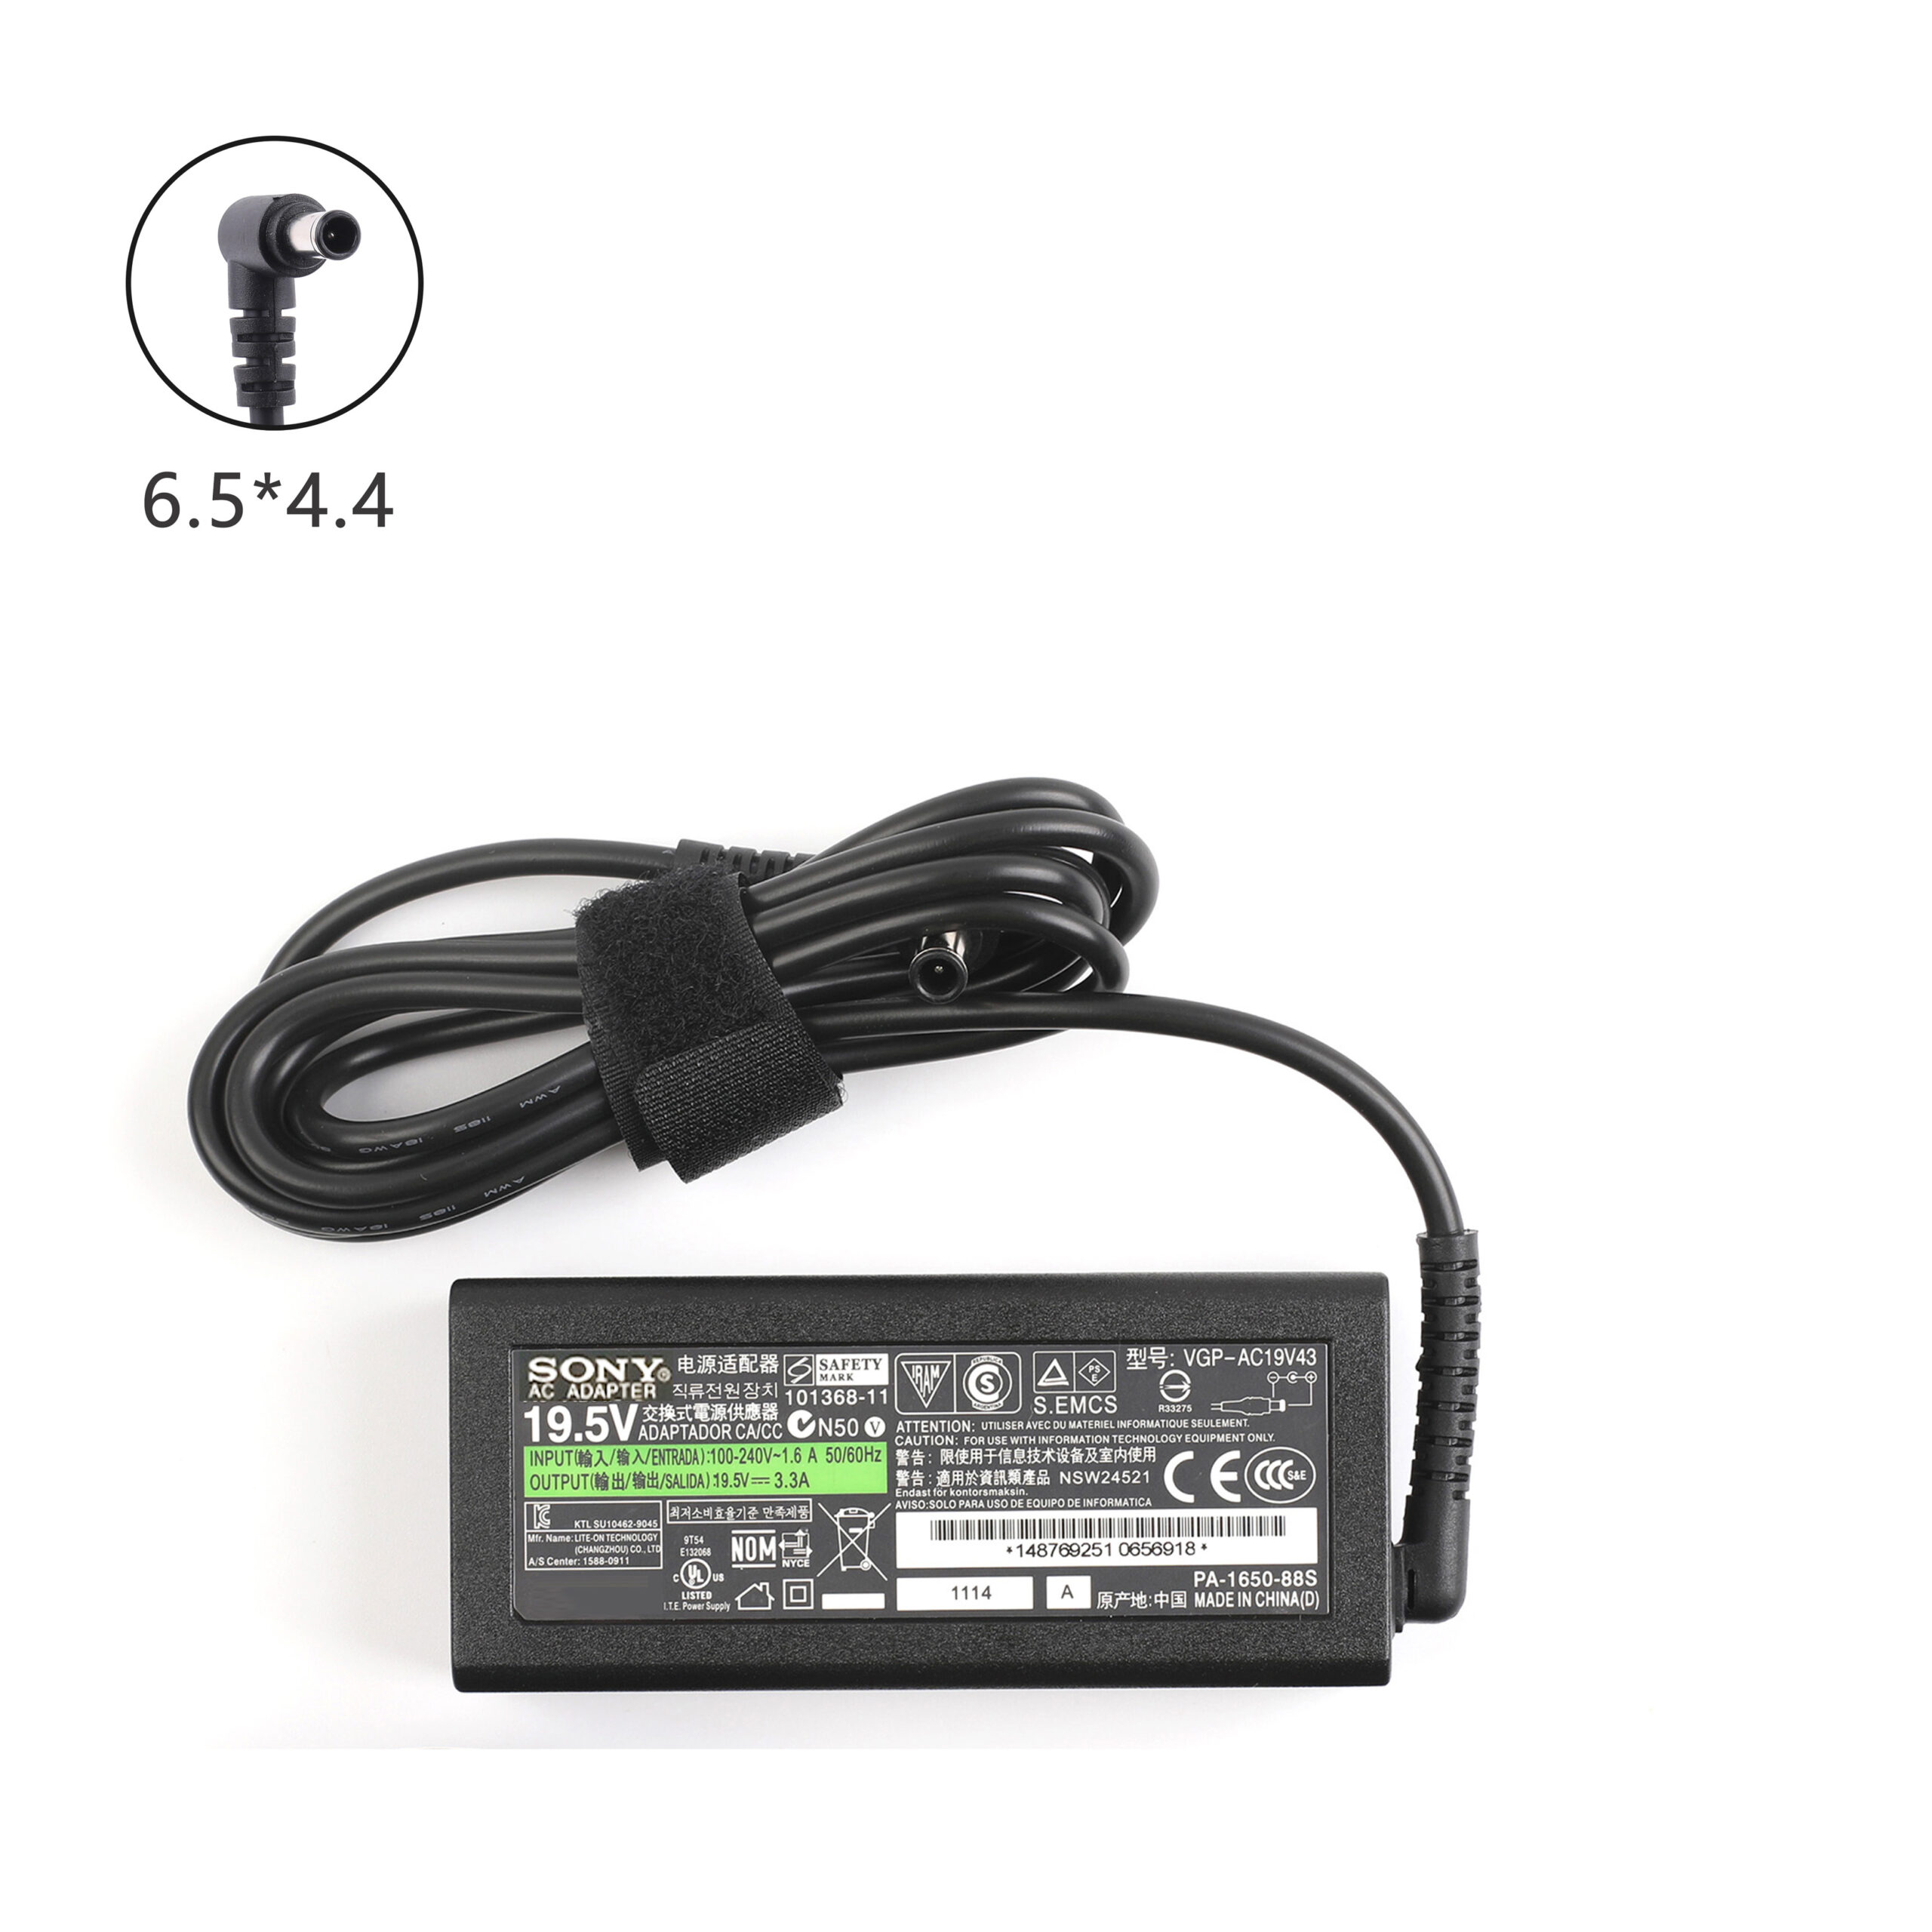 Sony Vaio VPCEB11FM VPCEB11FX/T Sony 65W 19.5V 3.3A 6.5 4.4MM Adaptateur Chargeur Adapter